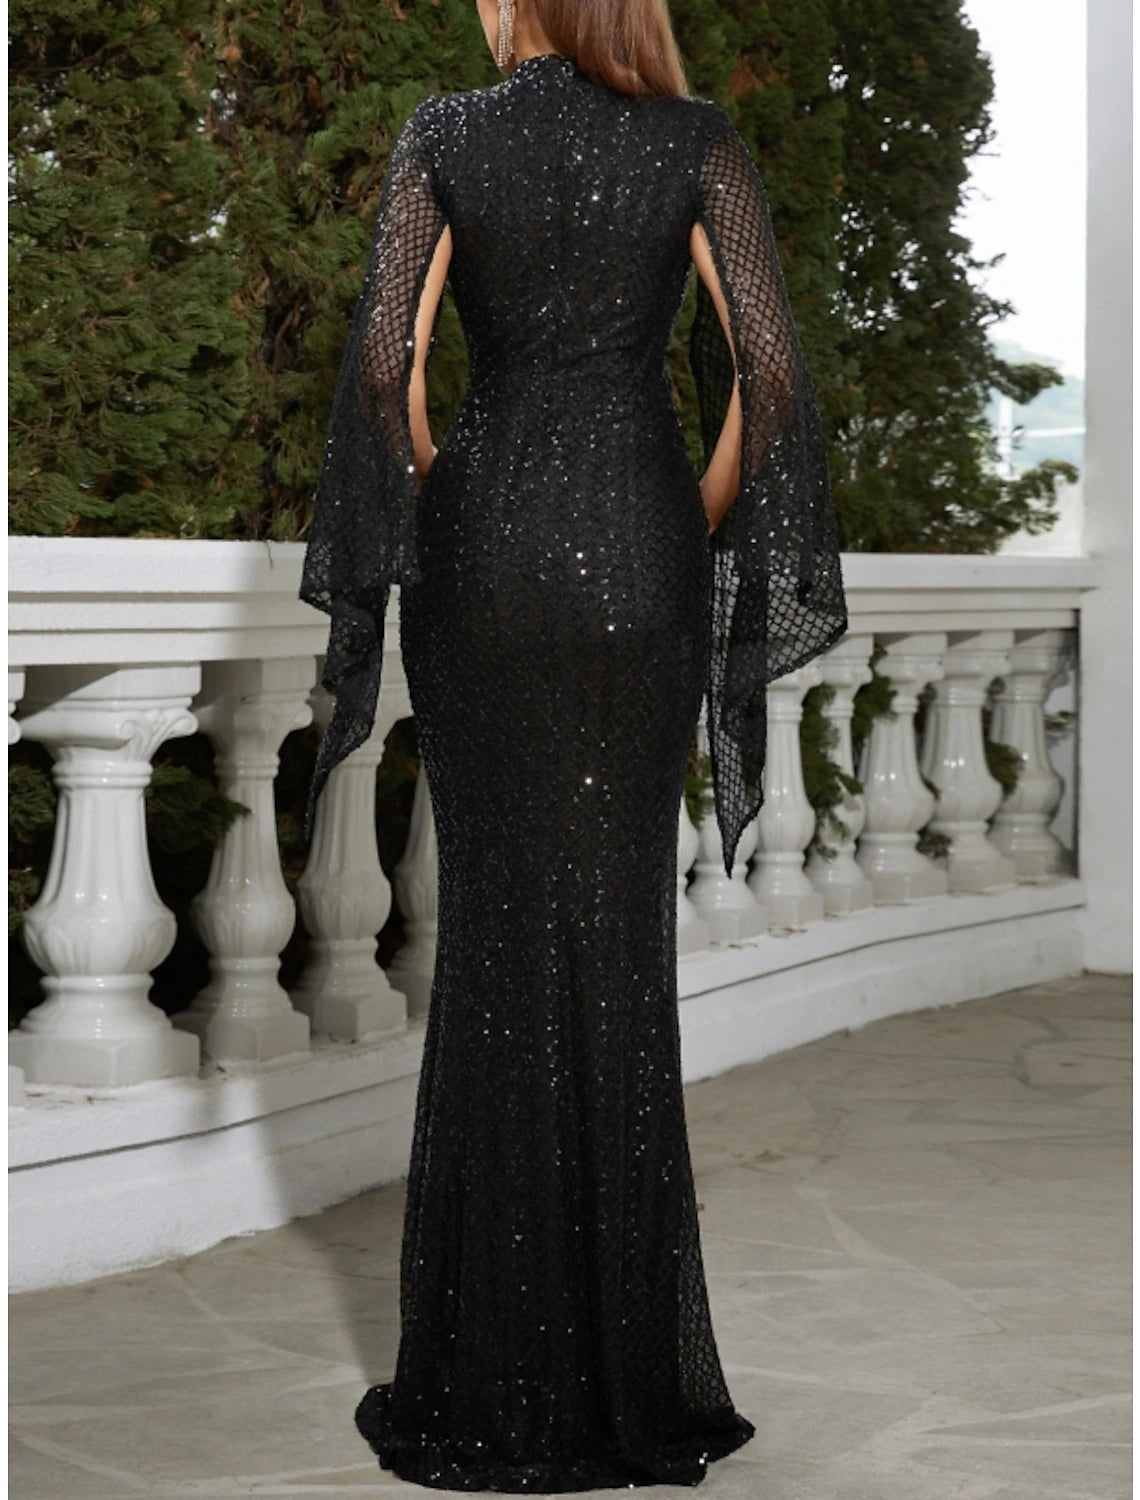 Mermaid / Trumpet Evening Gown Sparkle & Shine Dress Formal Fall Floor Length Sleeveless High Neck Sequined with Glitter